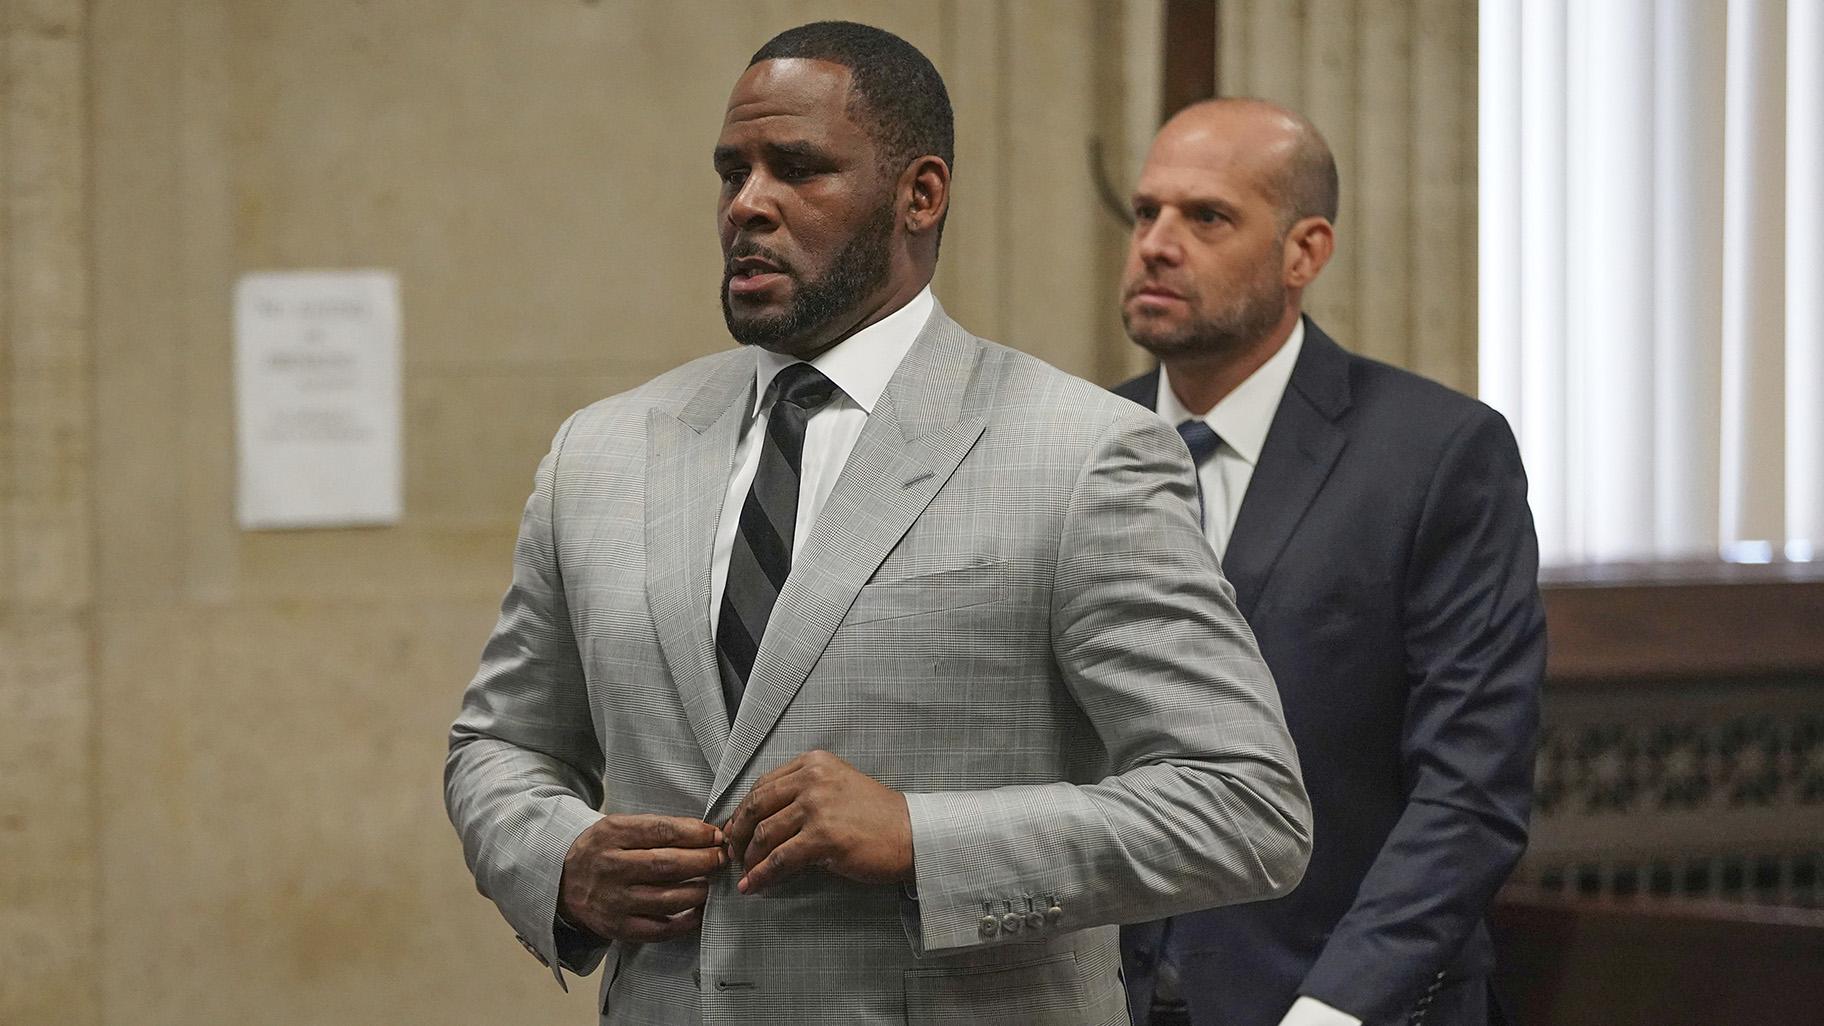 Federal Charges Ramp Up Pressure on R. Kelly to Make Deal Chicago